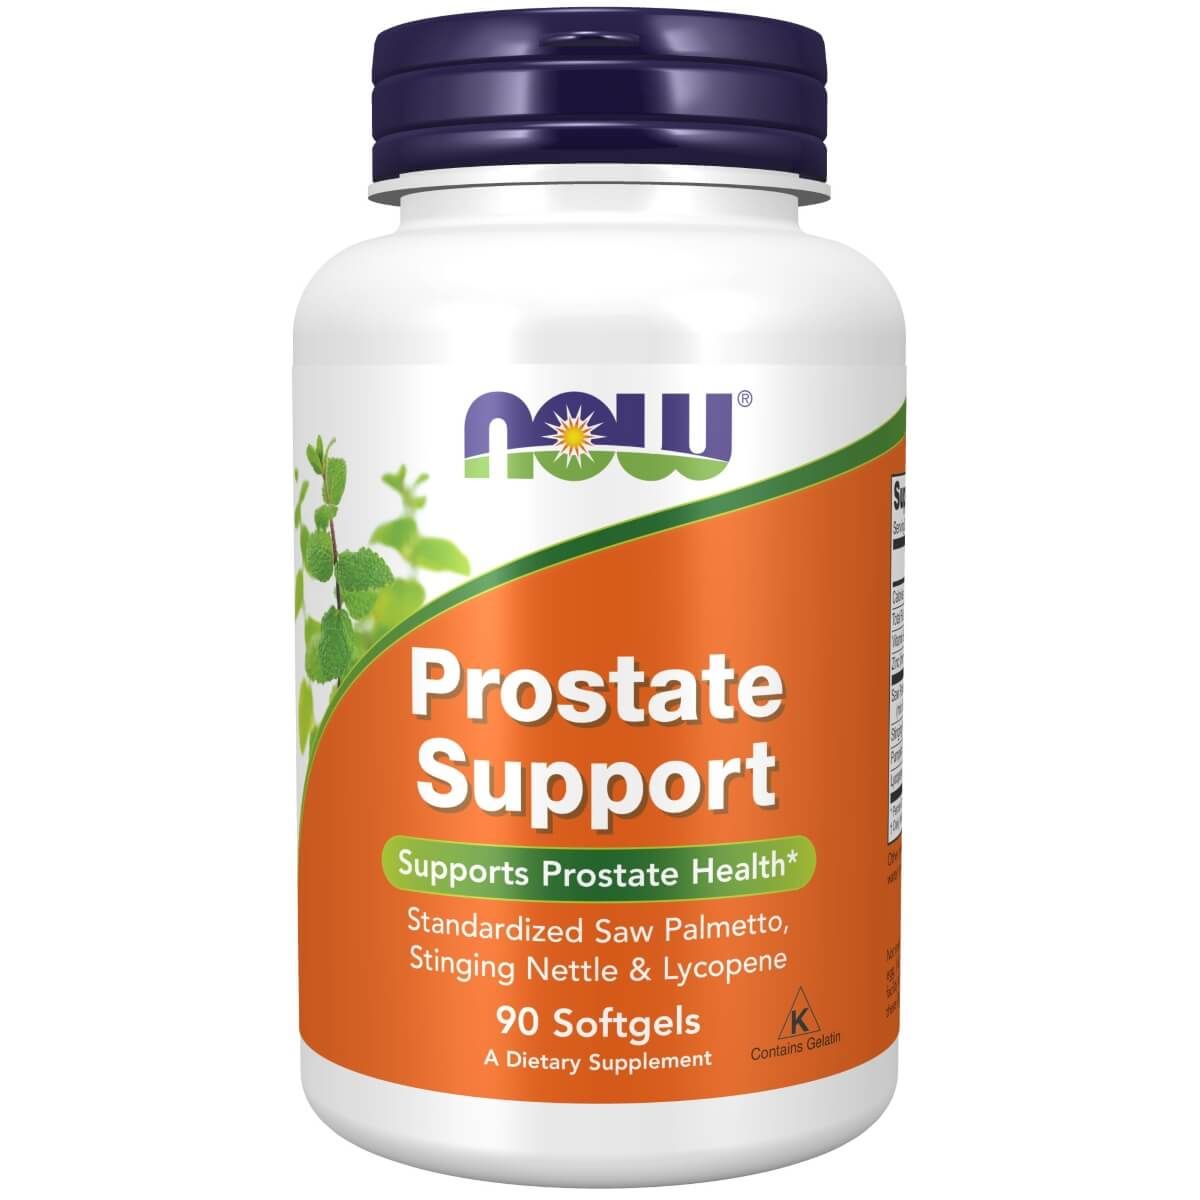 Photos - Vitamins & Minerals Now Foods Prostate Support 90 Softgels PBW-P27632 